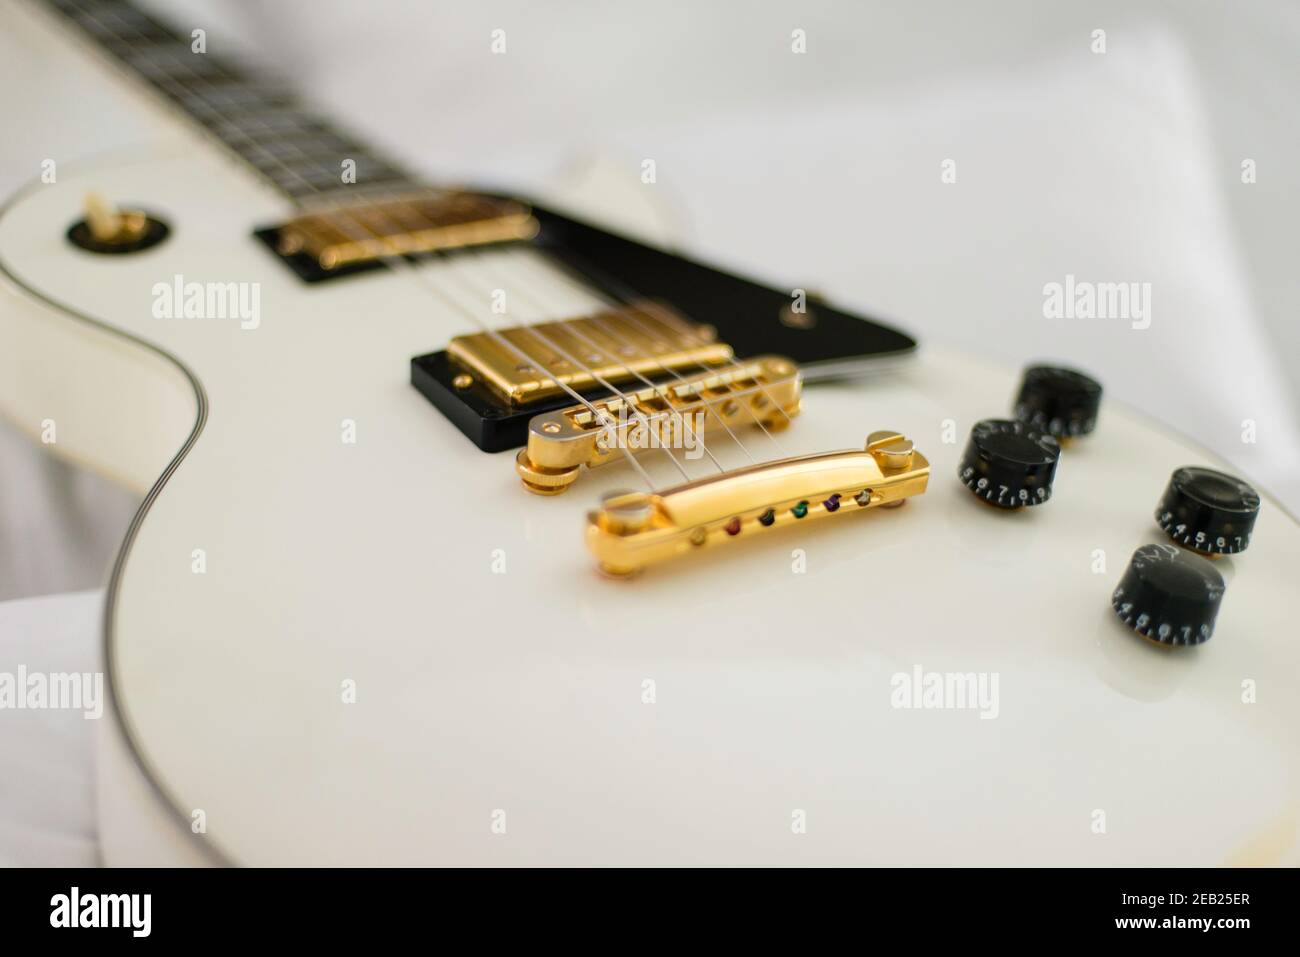 White Gibson guitar on background of white bed sheets. Stock Photo